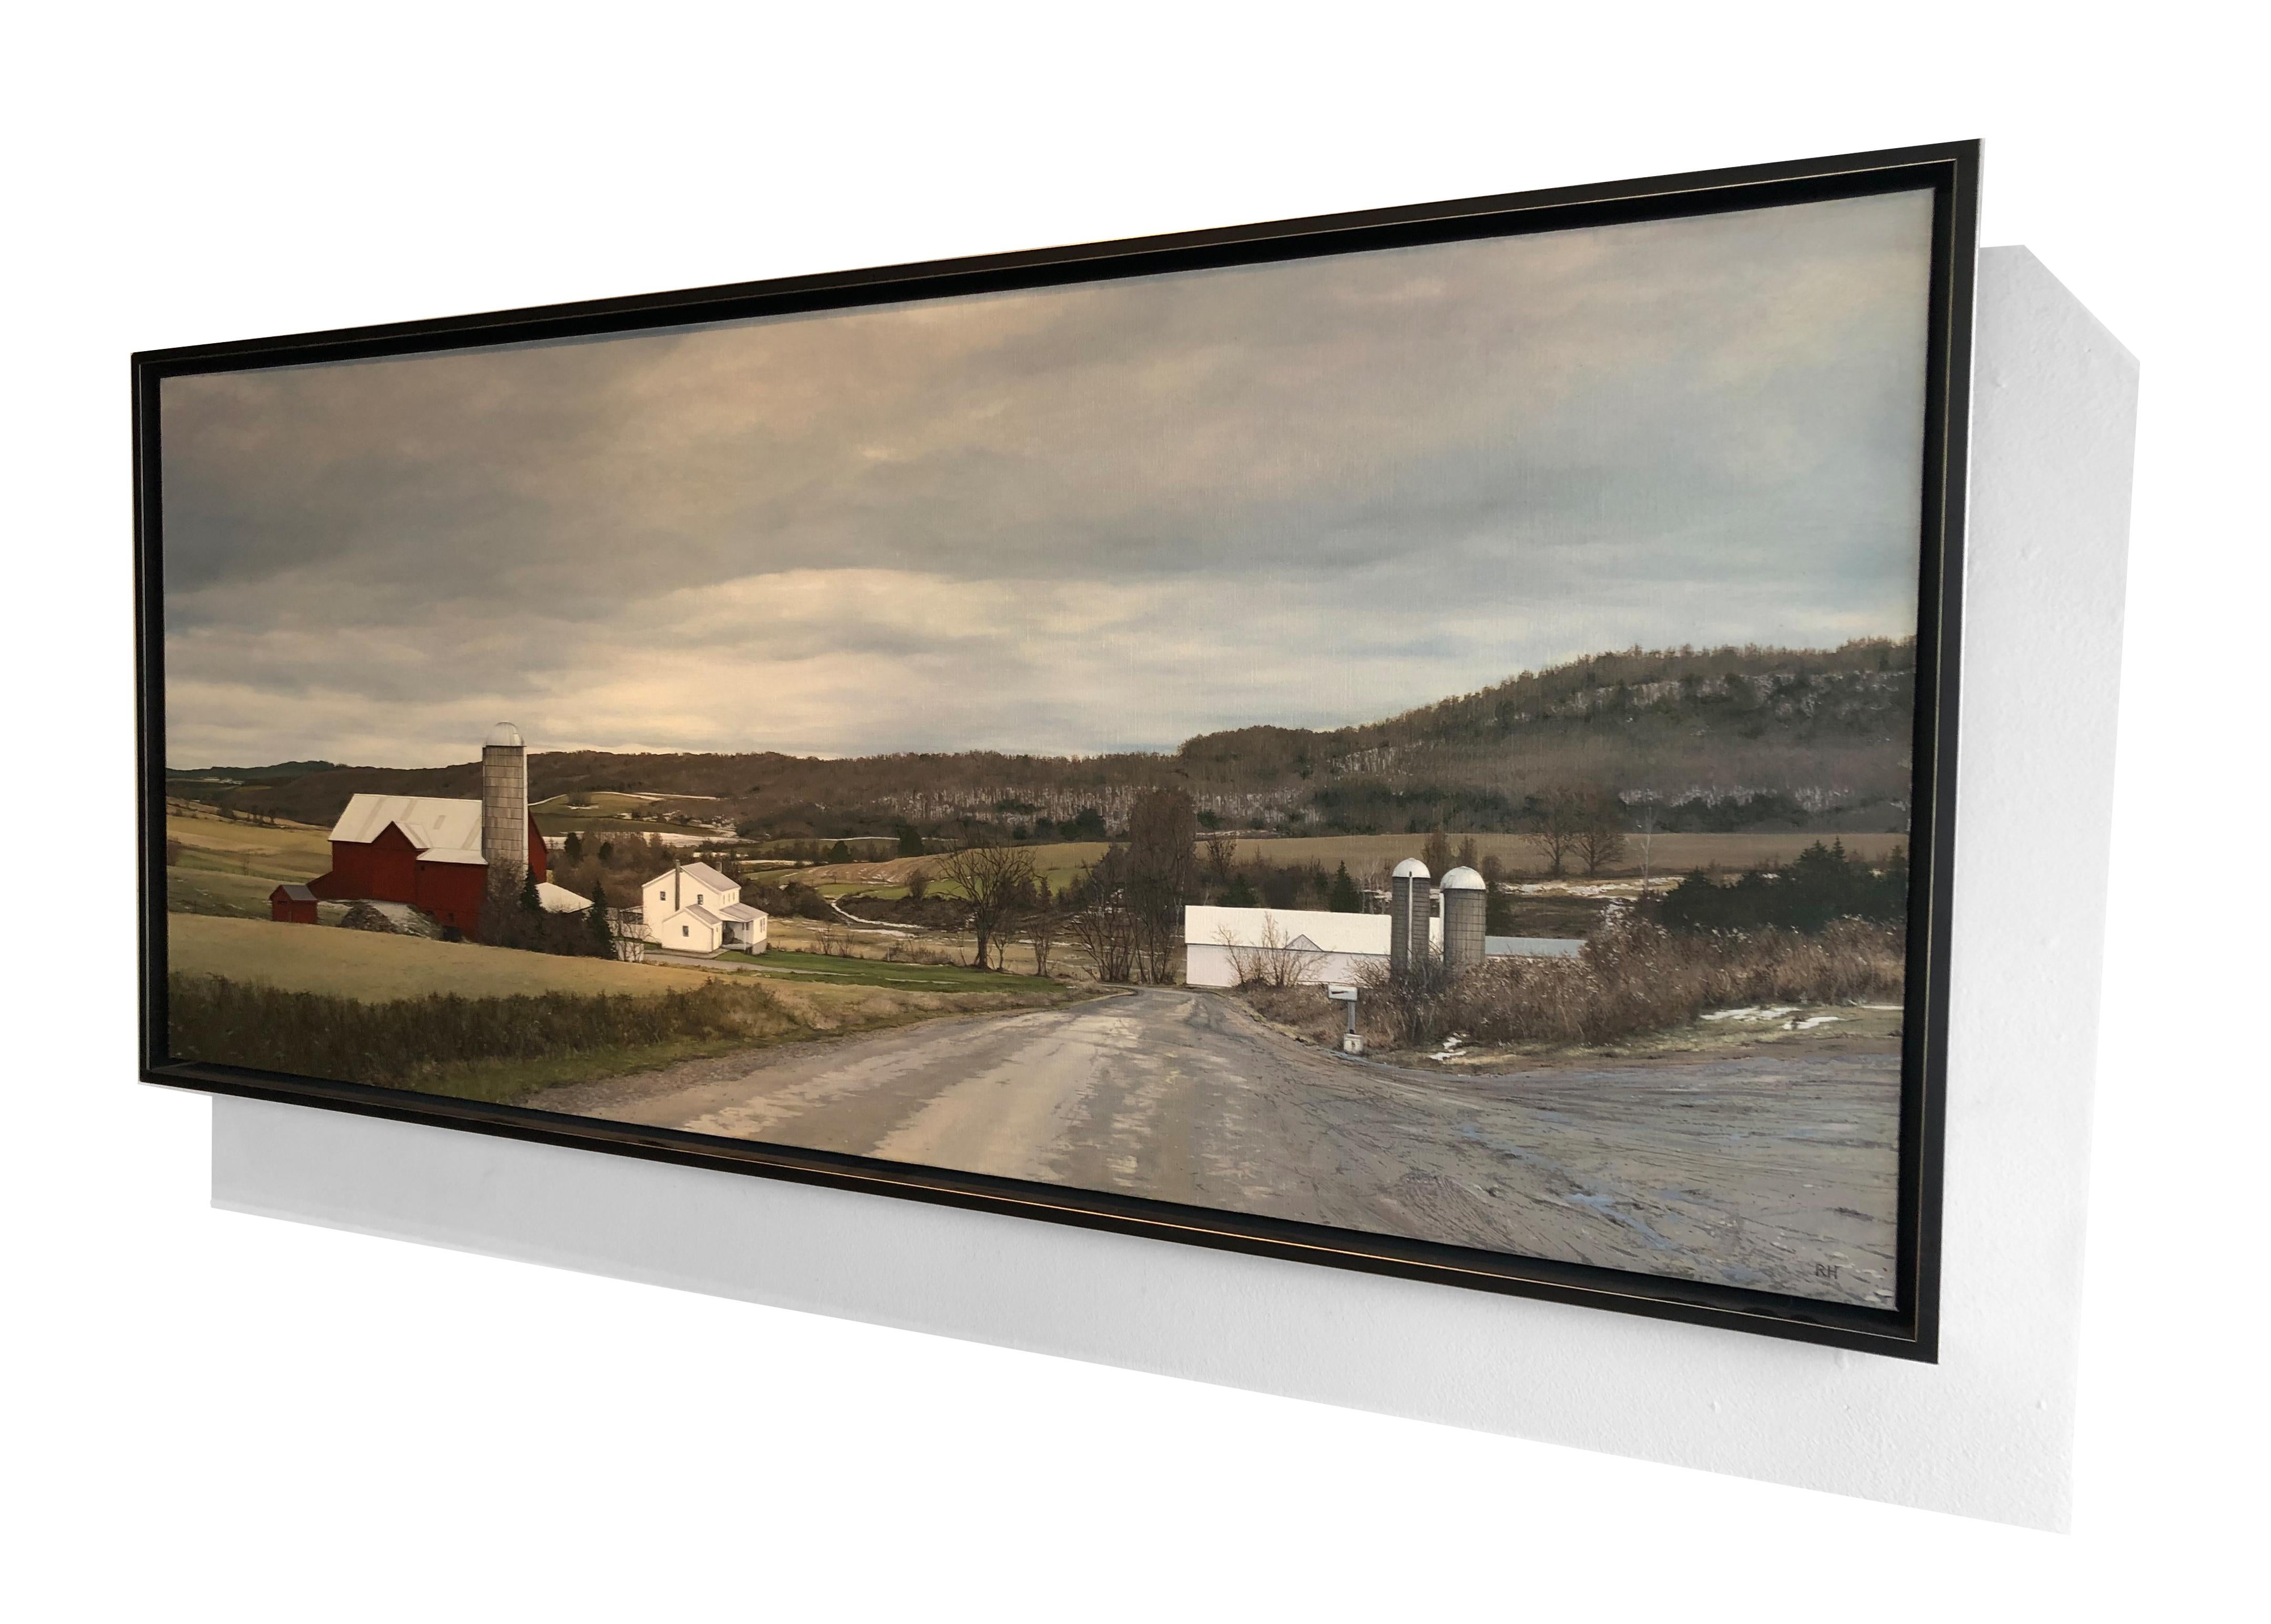 “Somewhere Near Woodhull, NY” is a photorealist oil on canvas painting. The work features a sprawling farm located in upstate New York. The light dusting of snow in the background suggests this is a winter scene. Richard Heisler's work arises from